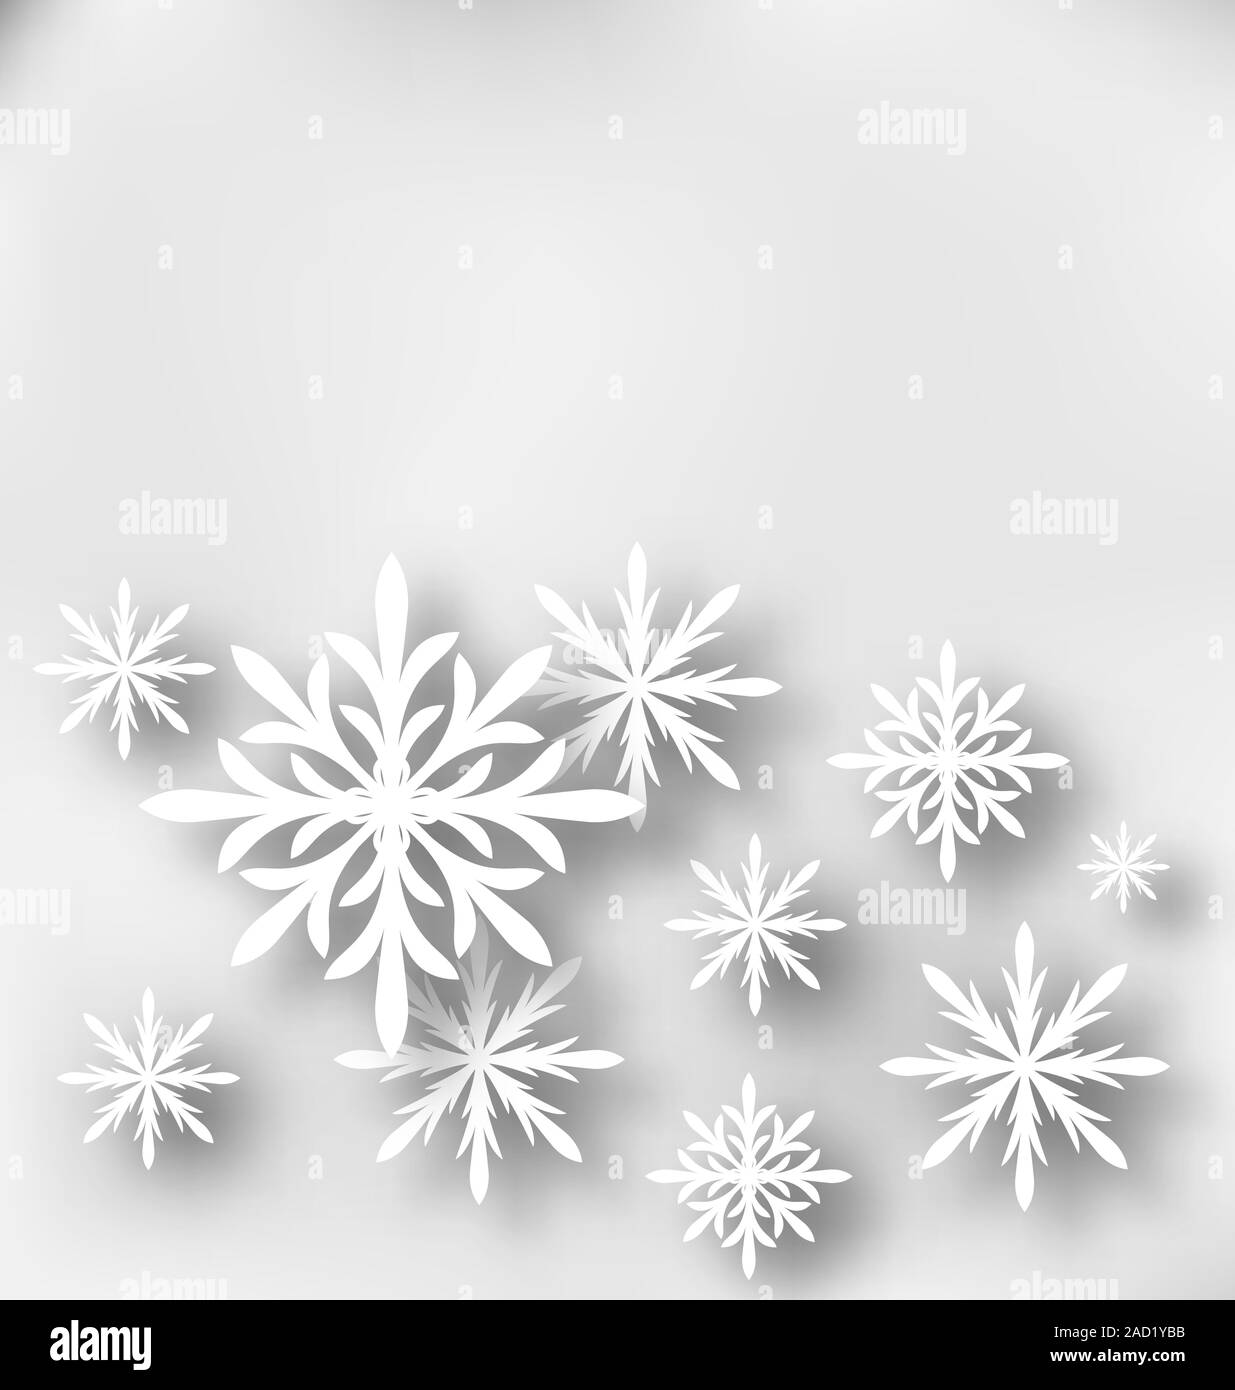 Christmas greeting card with paper snowflakes Stock Photo